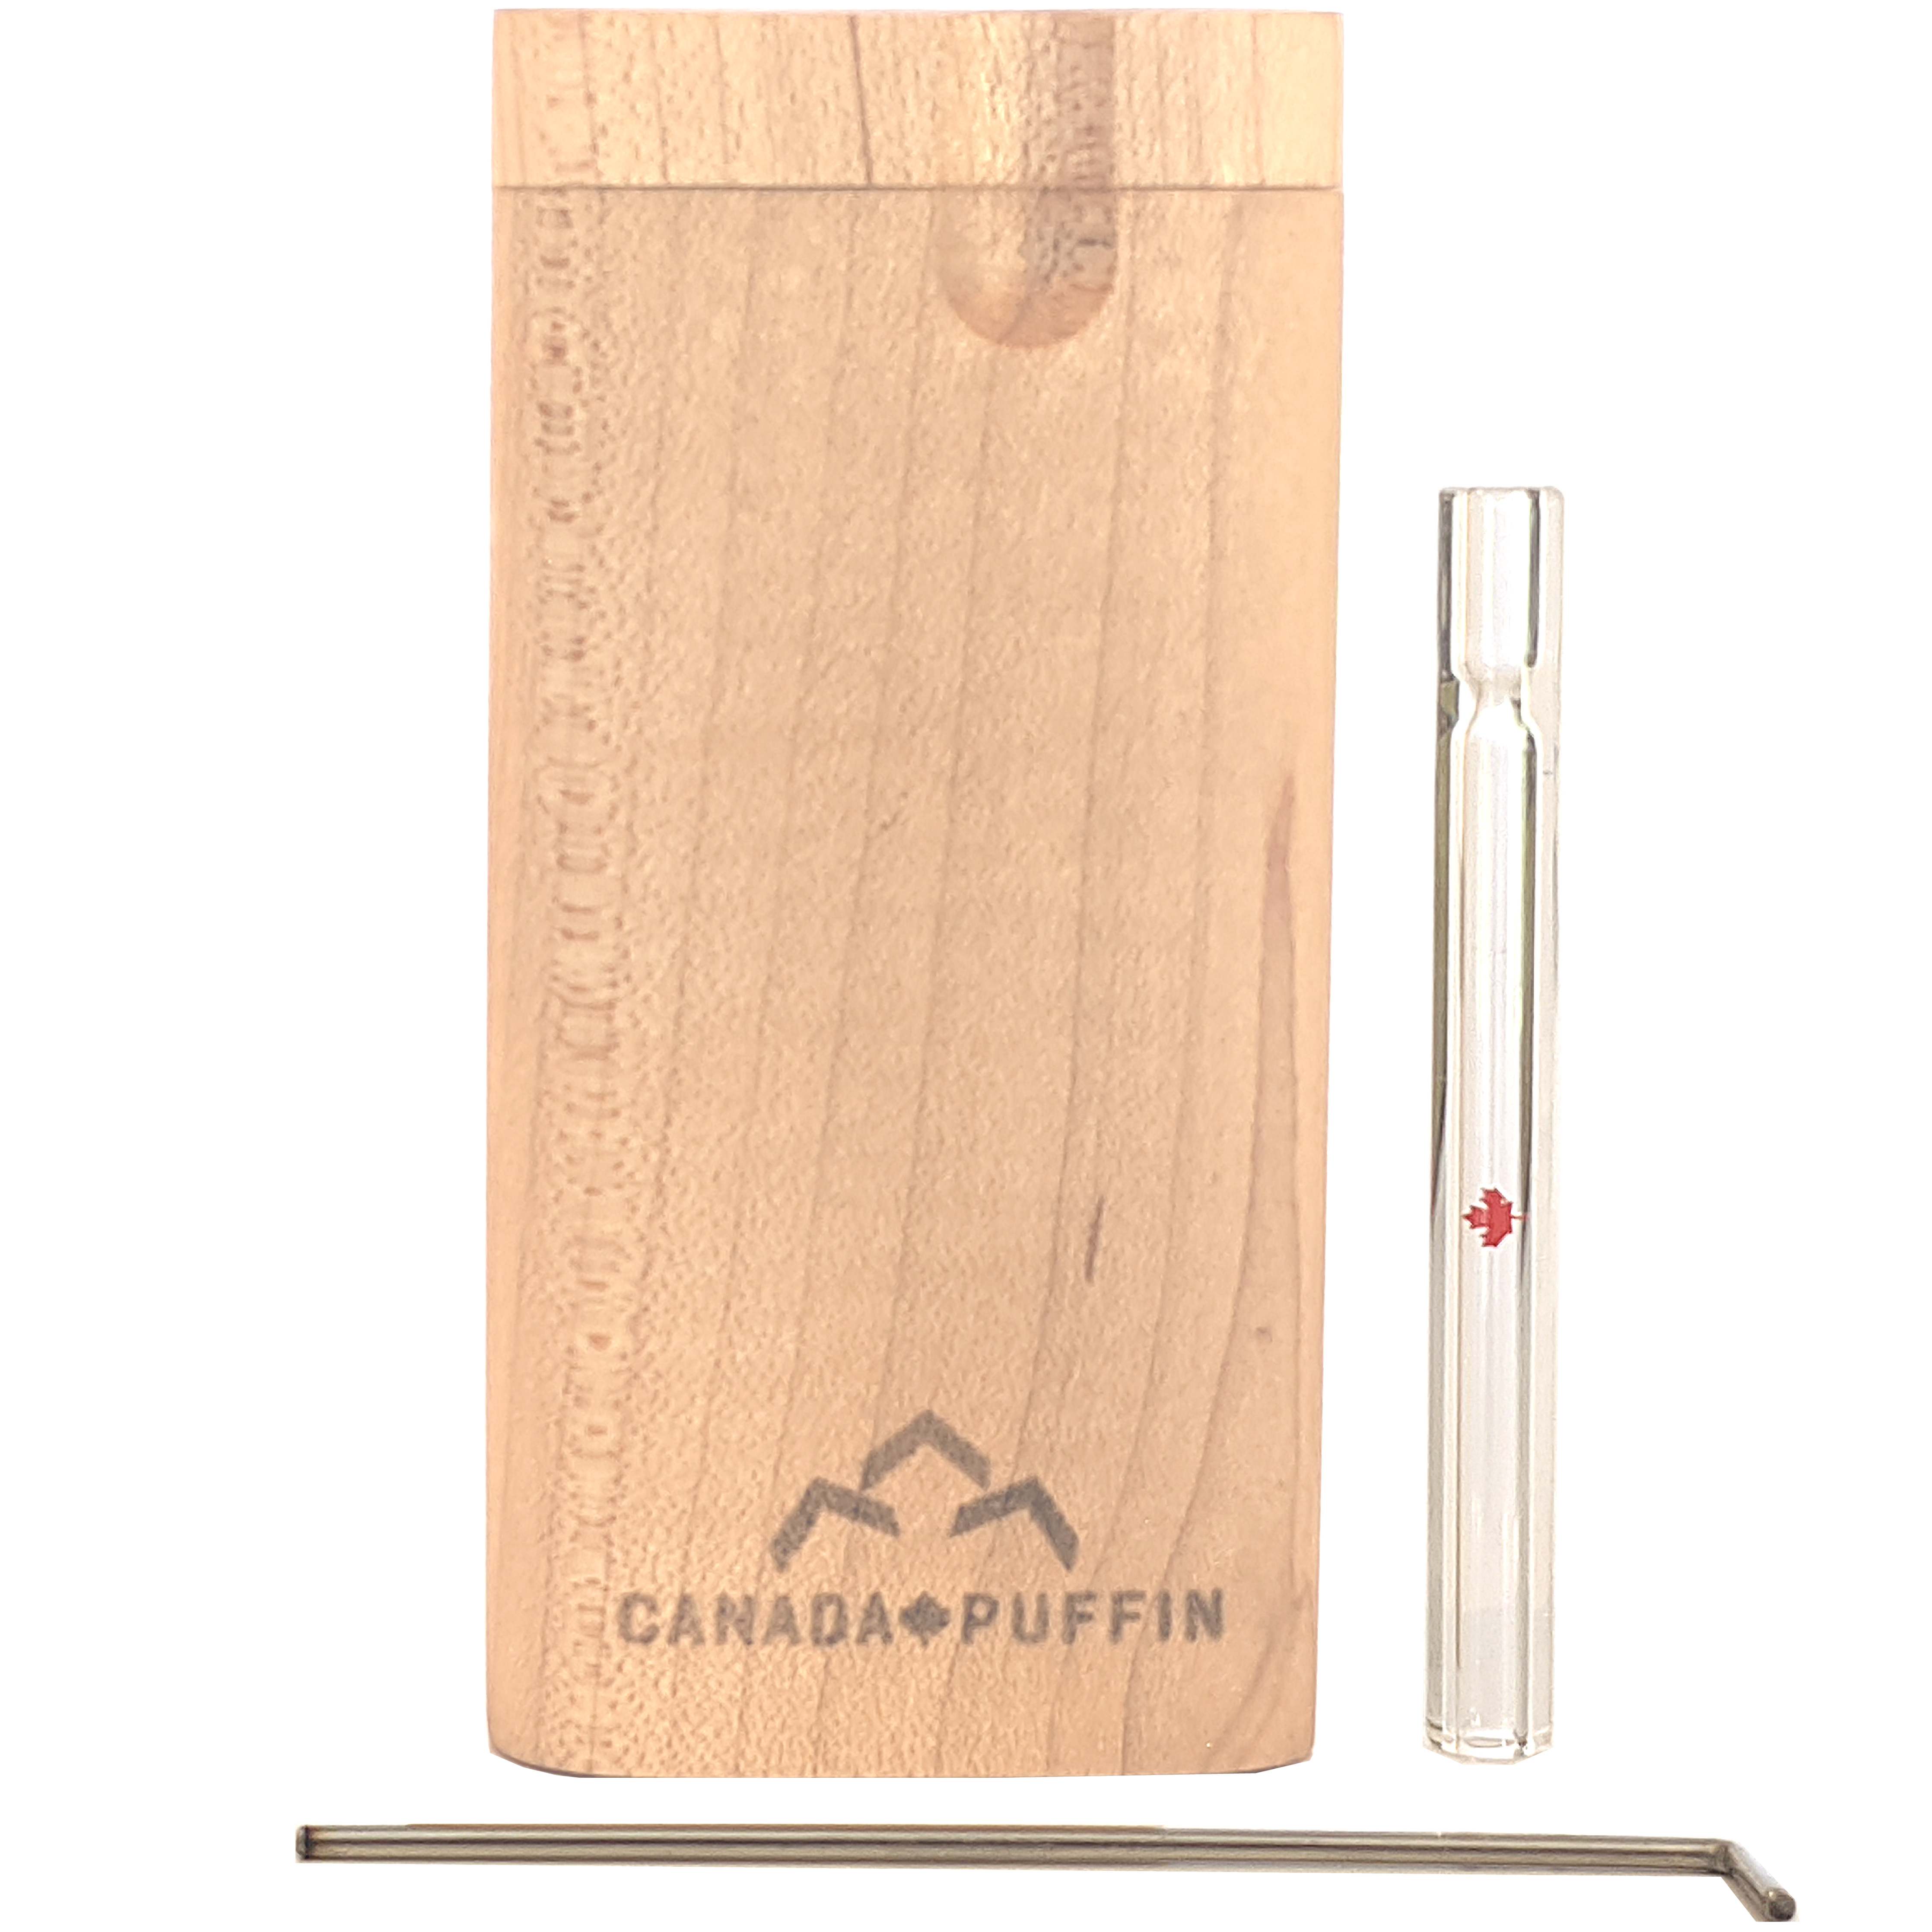 Puffin Banff Dugout and One Hitter